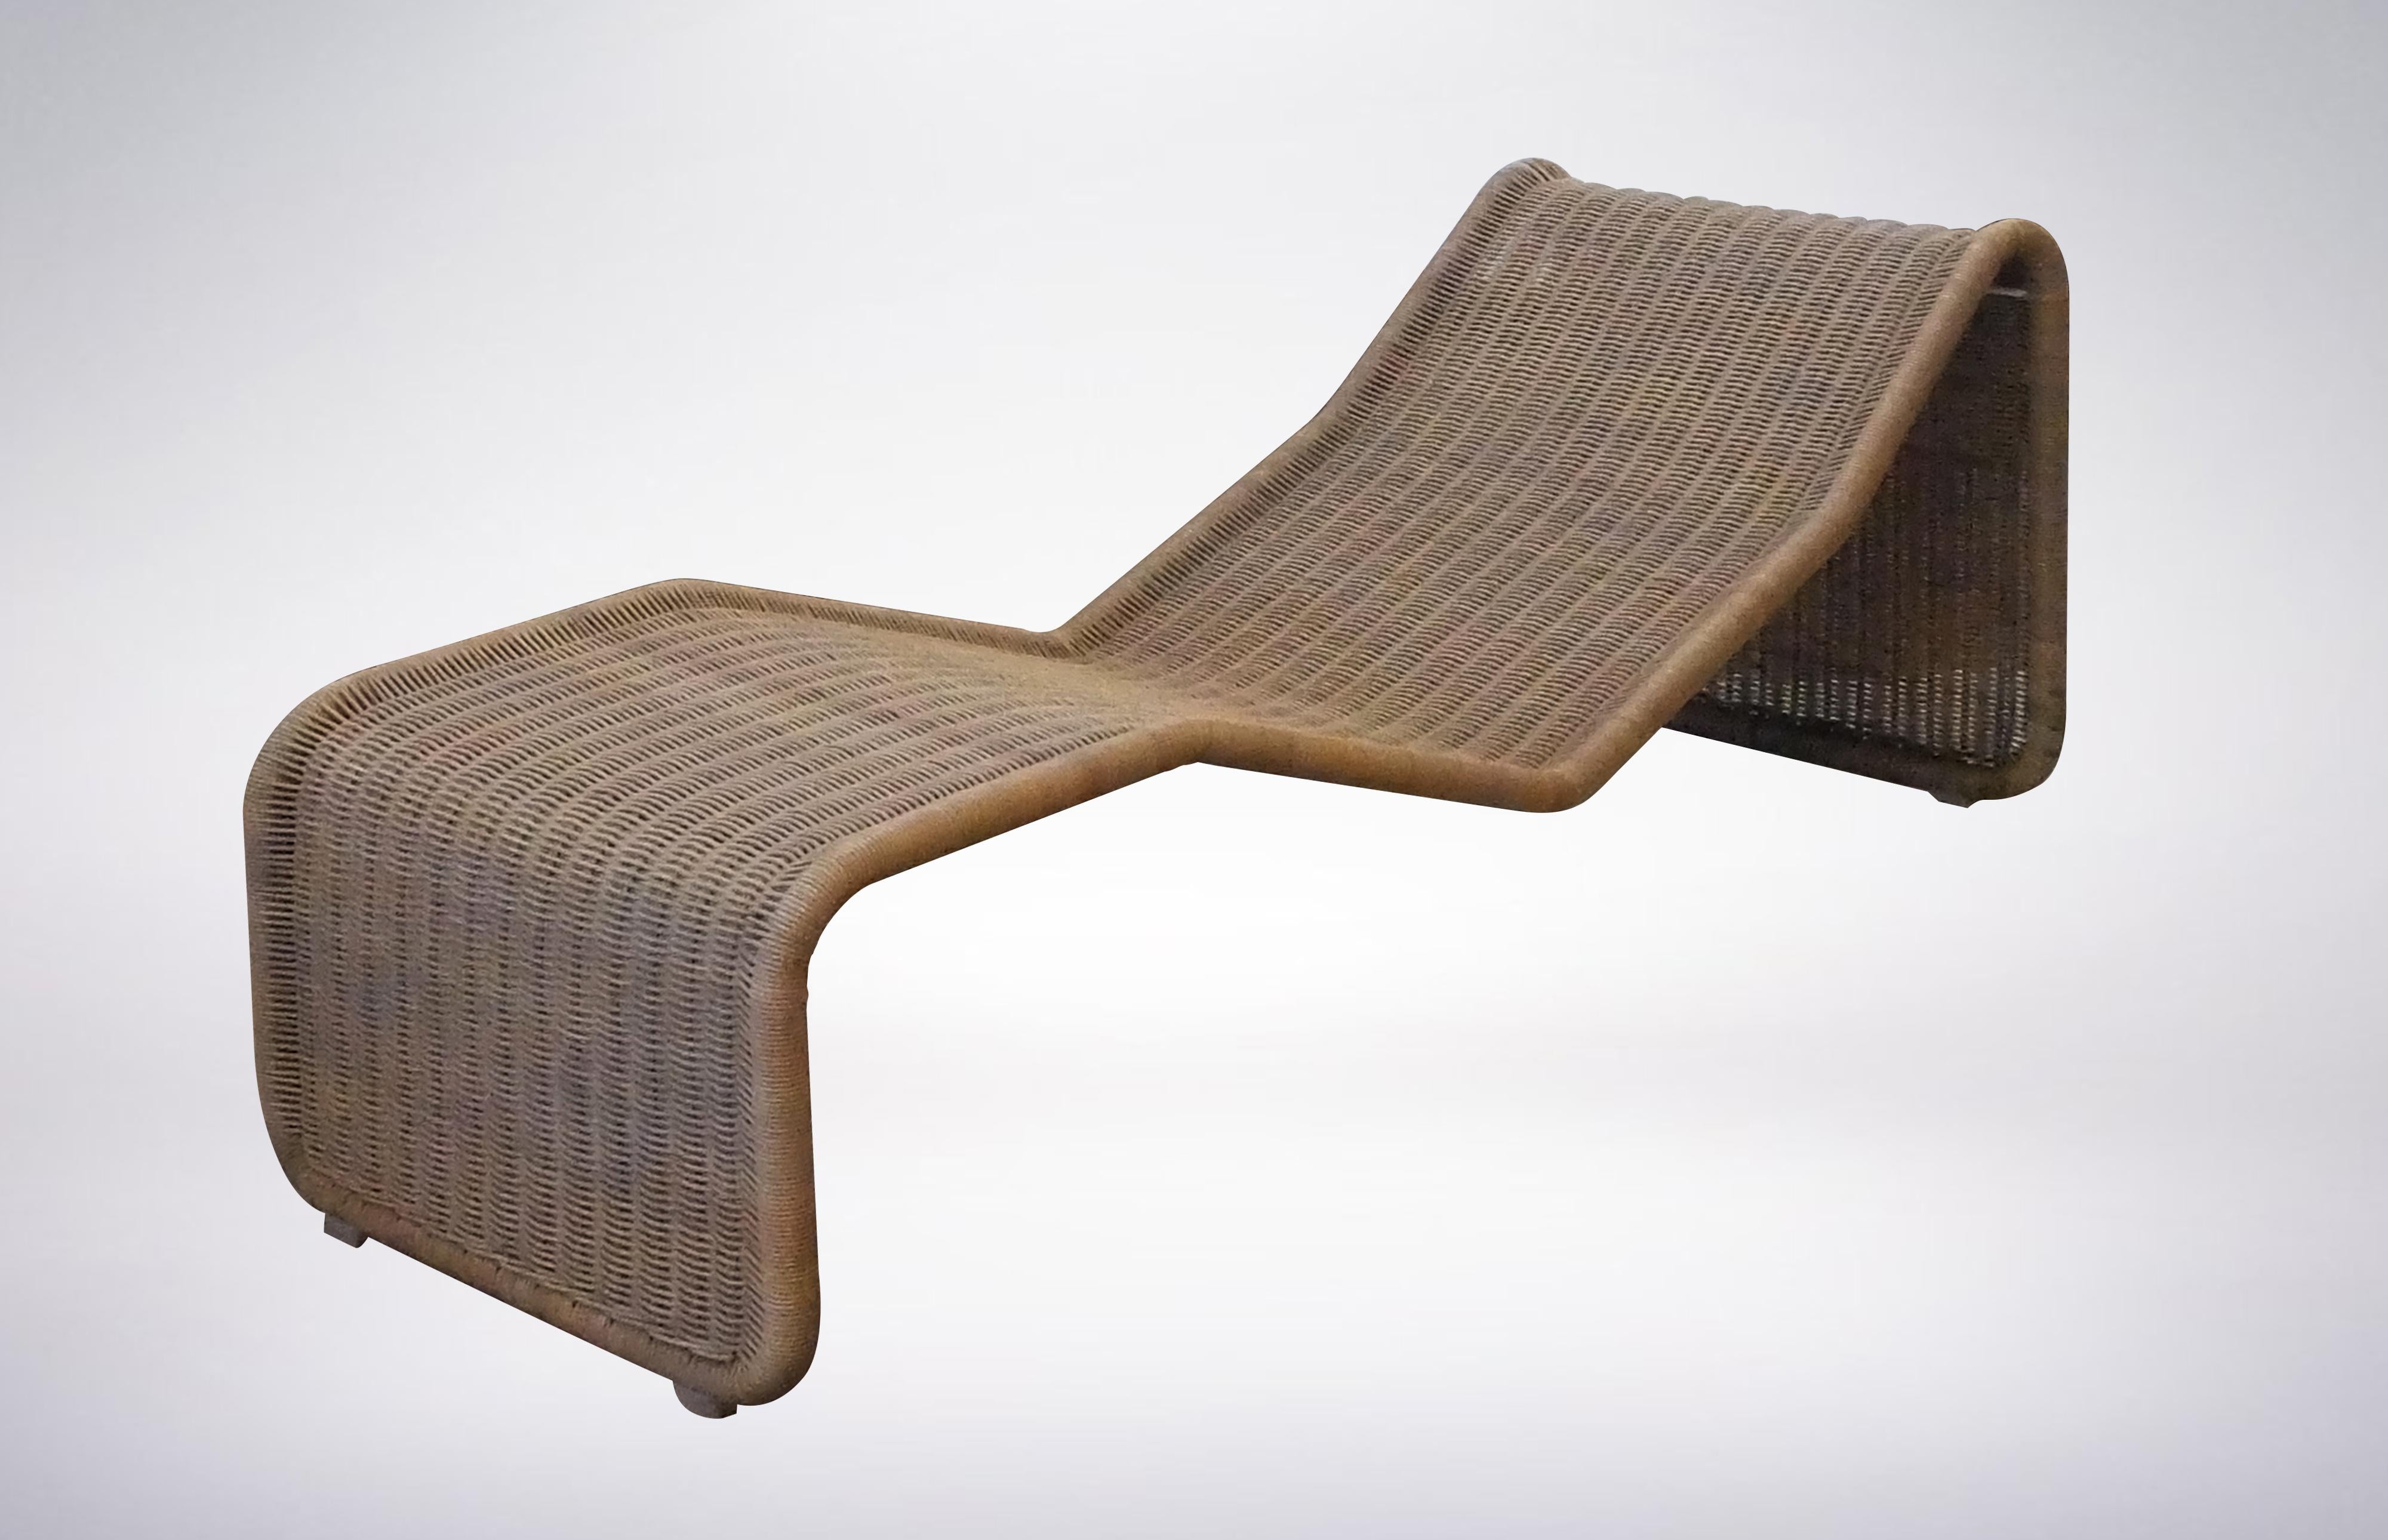 Tito Agnoli
Italian Mid-Century Modern rattan chaise lounge
1957
This minimalist chaise lounge is a pioneer Italian design combining style and comfort. It displays intricate wickerwork designed by Tito Agnoli.



Please note : the 